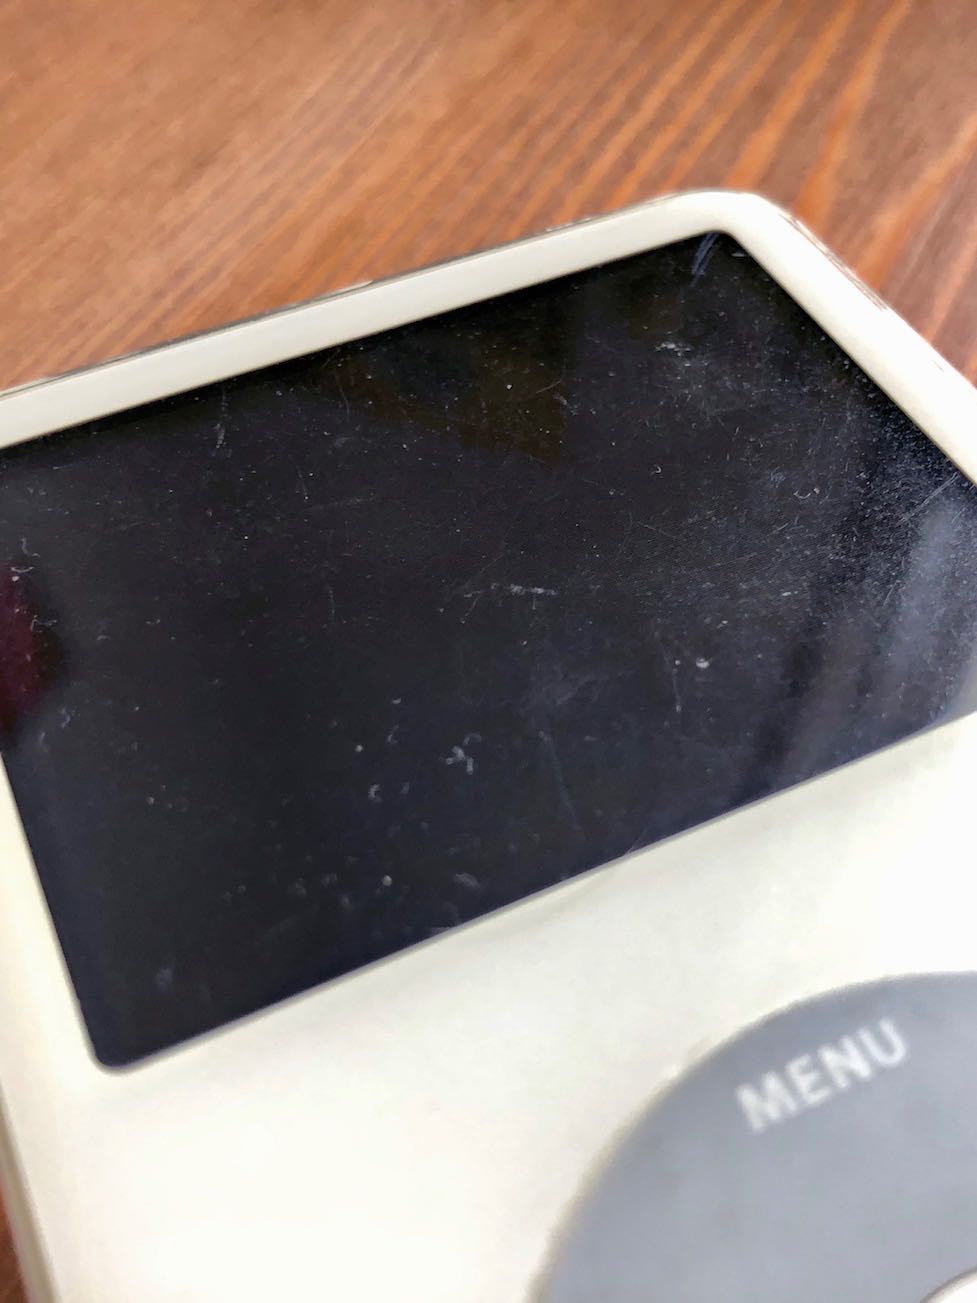 My old iPod Video's scratchy screen